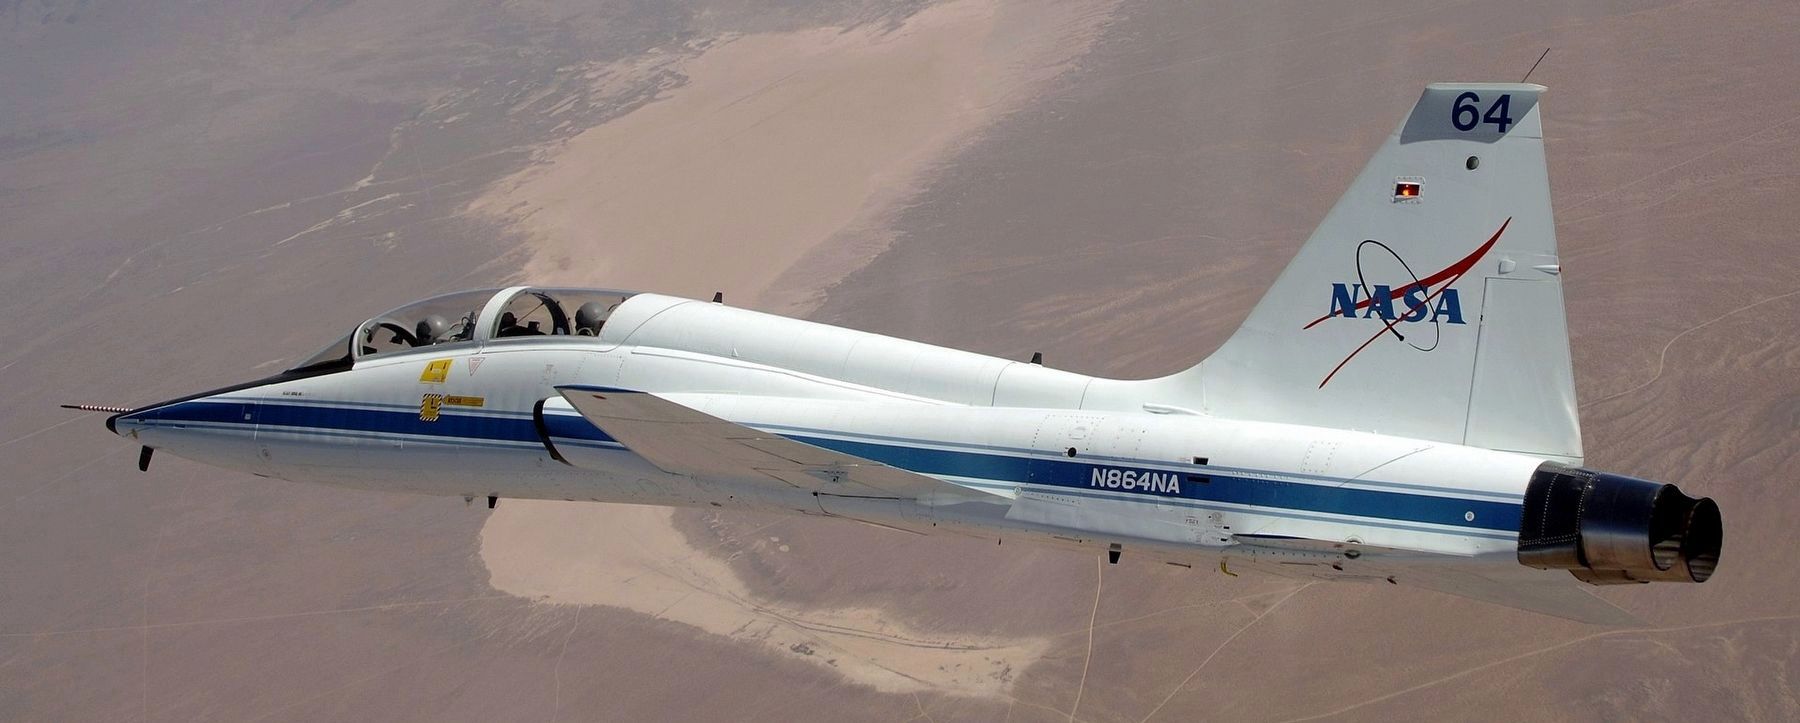 NASA Dryden's T-38 trainer aircraft in flight over Cuddeback Dry Lake in Southern California. image. Click for full size.